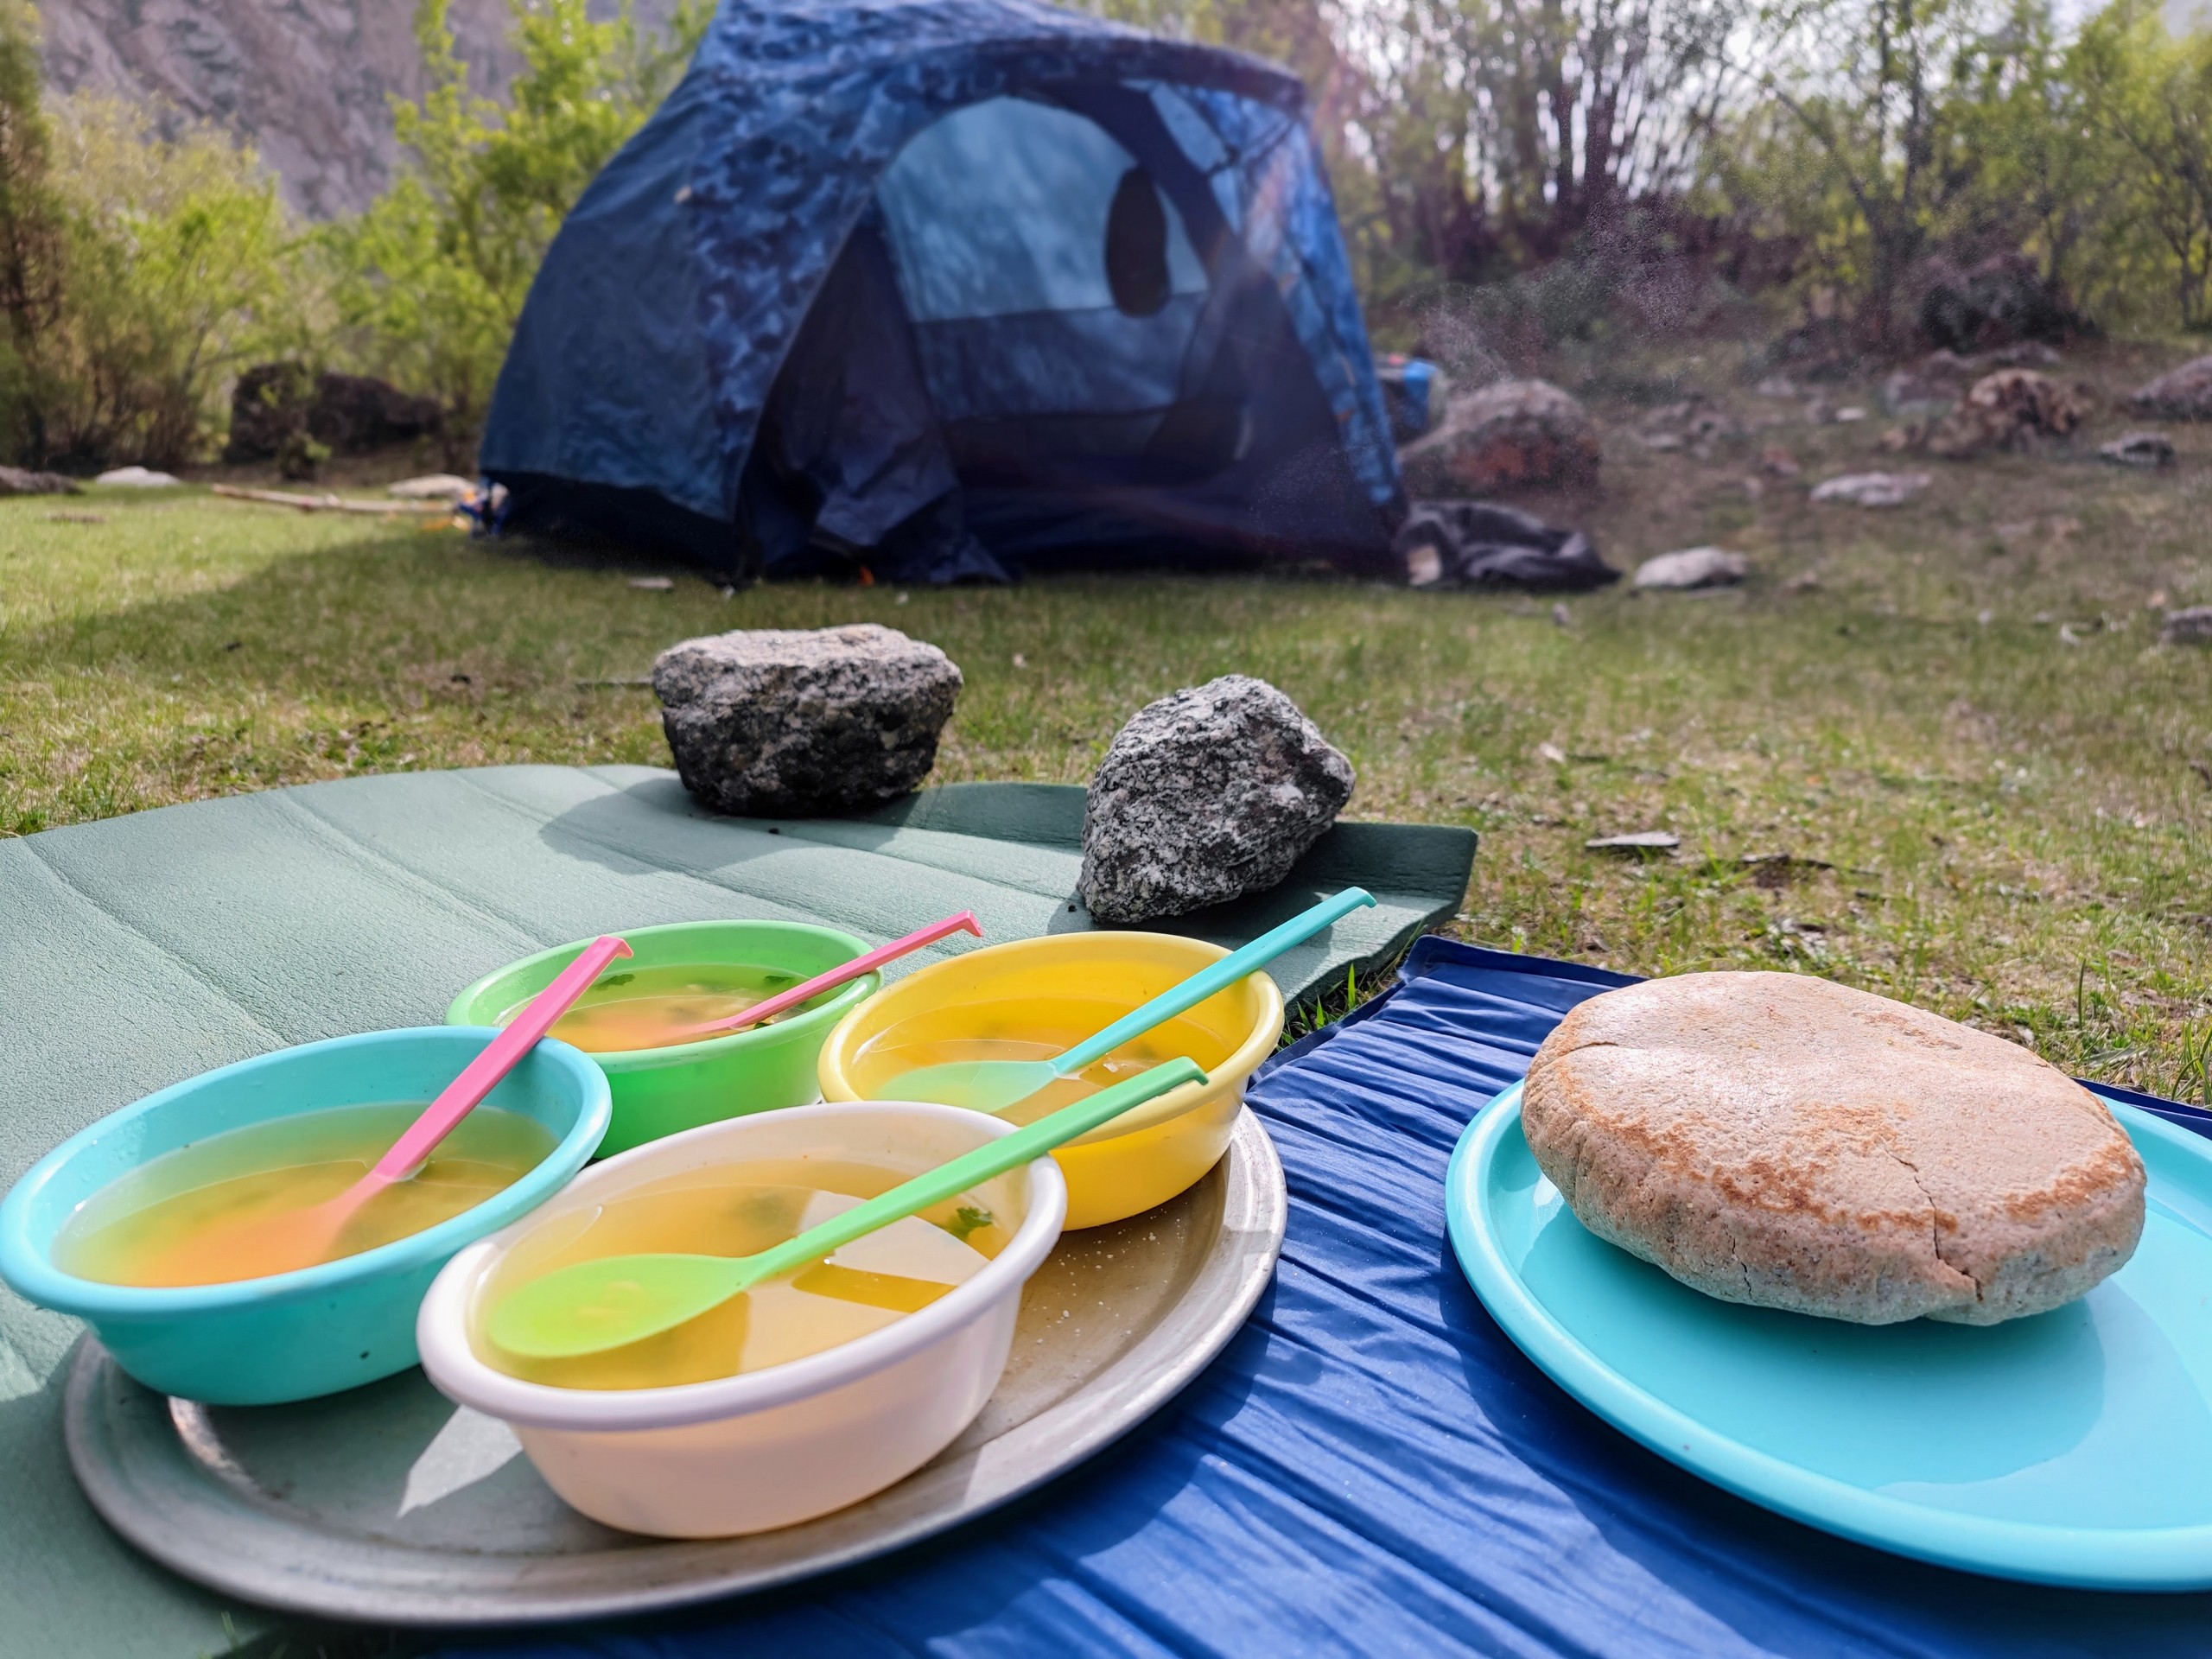 Soup & Bread served while trekking in Pakistan